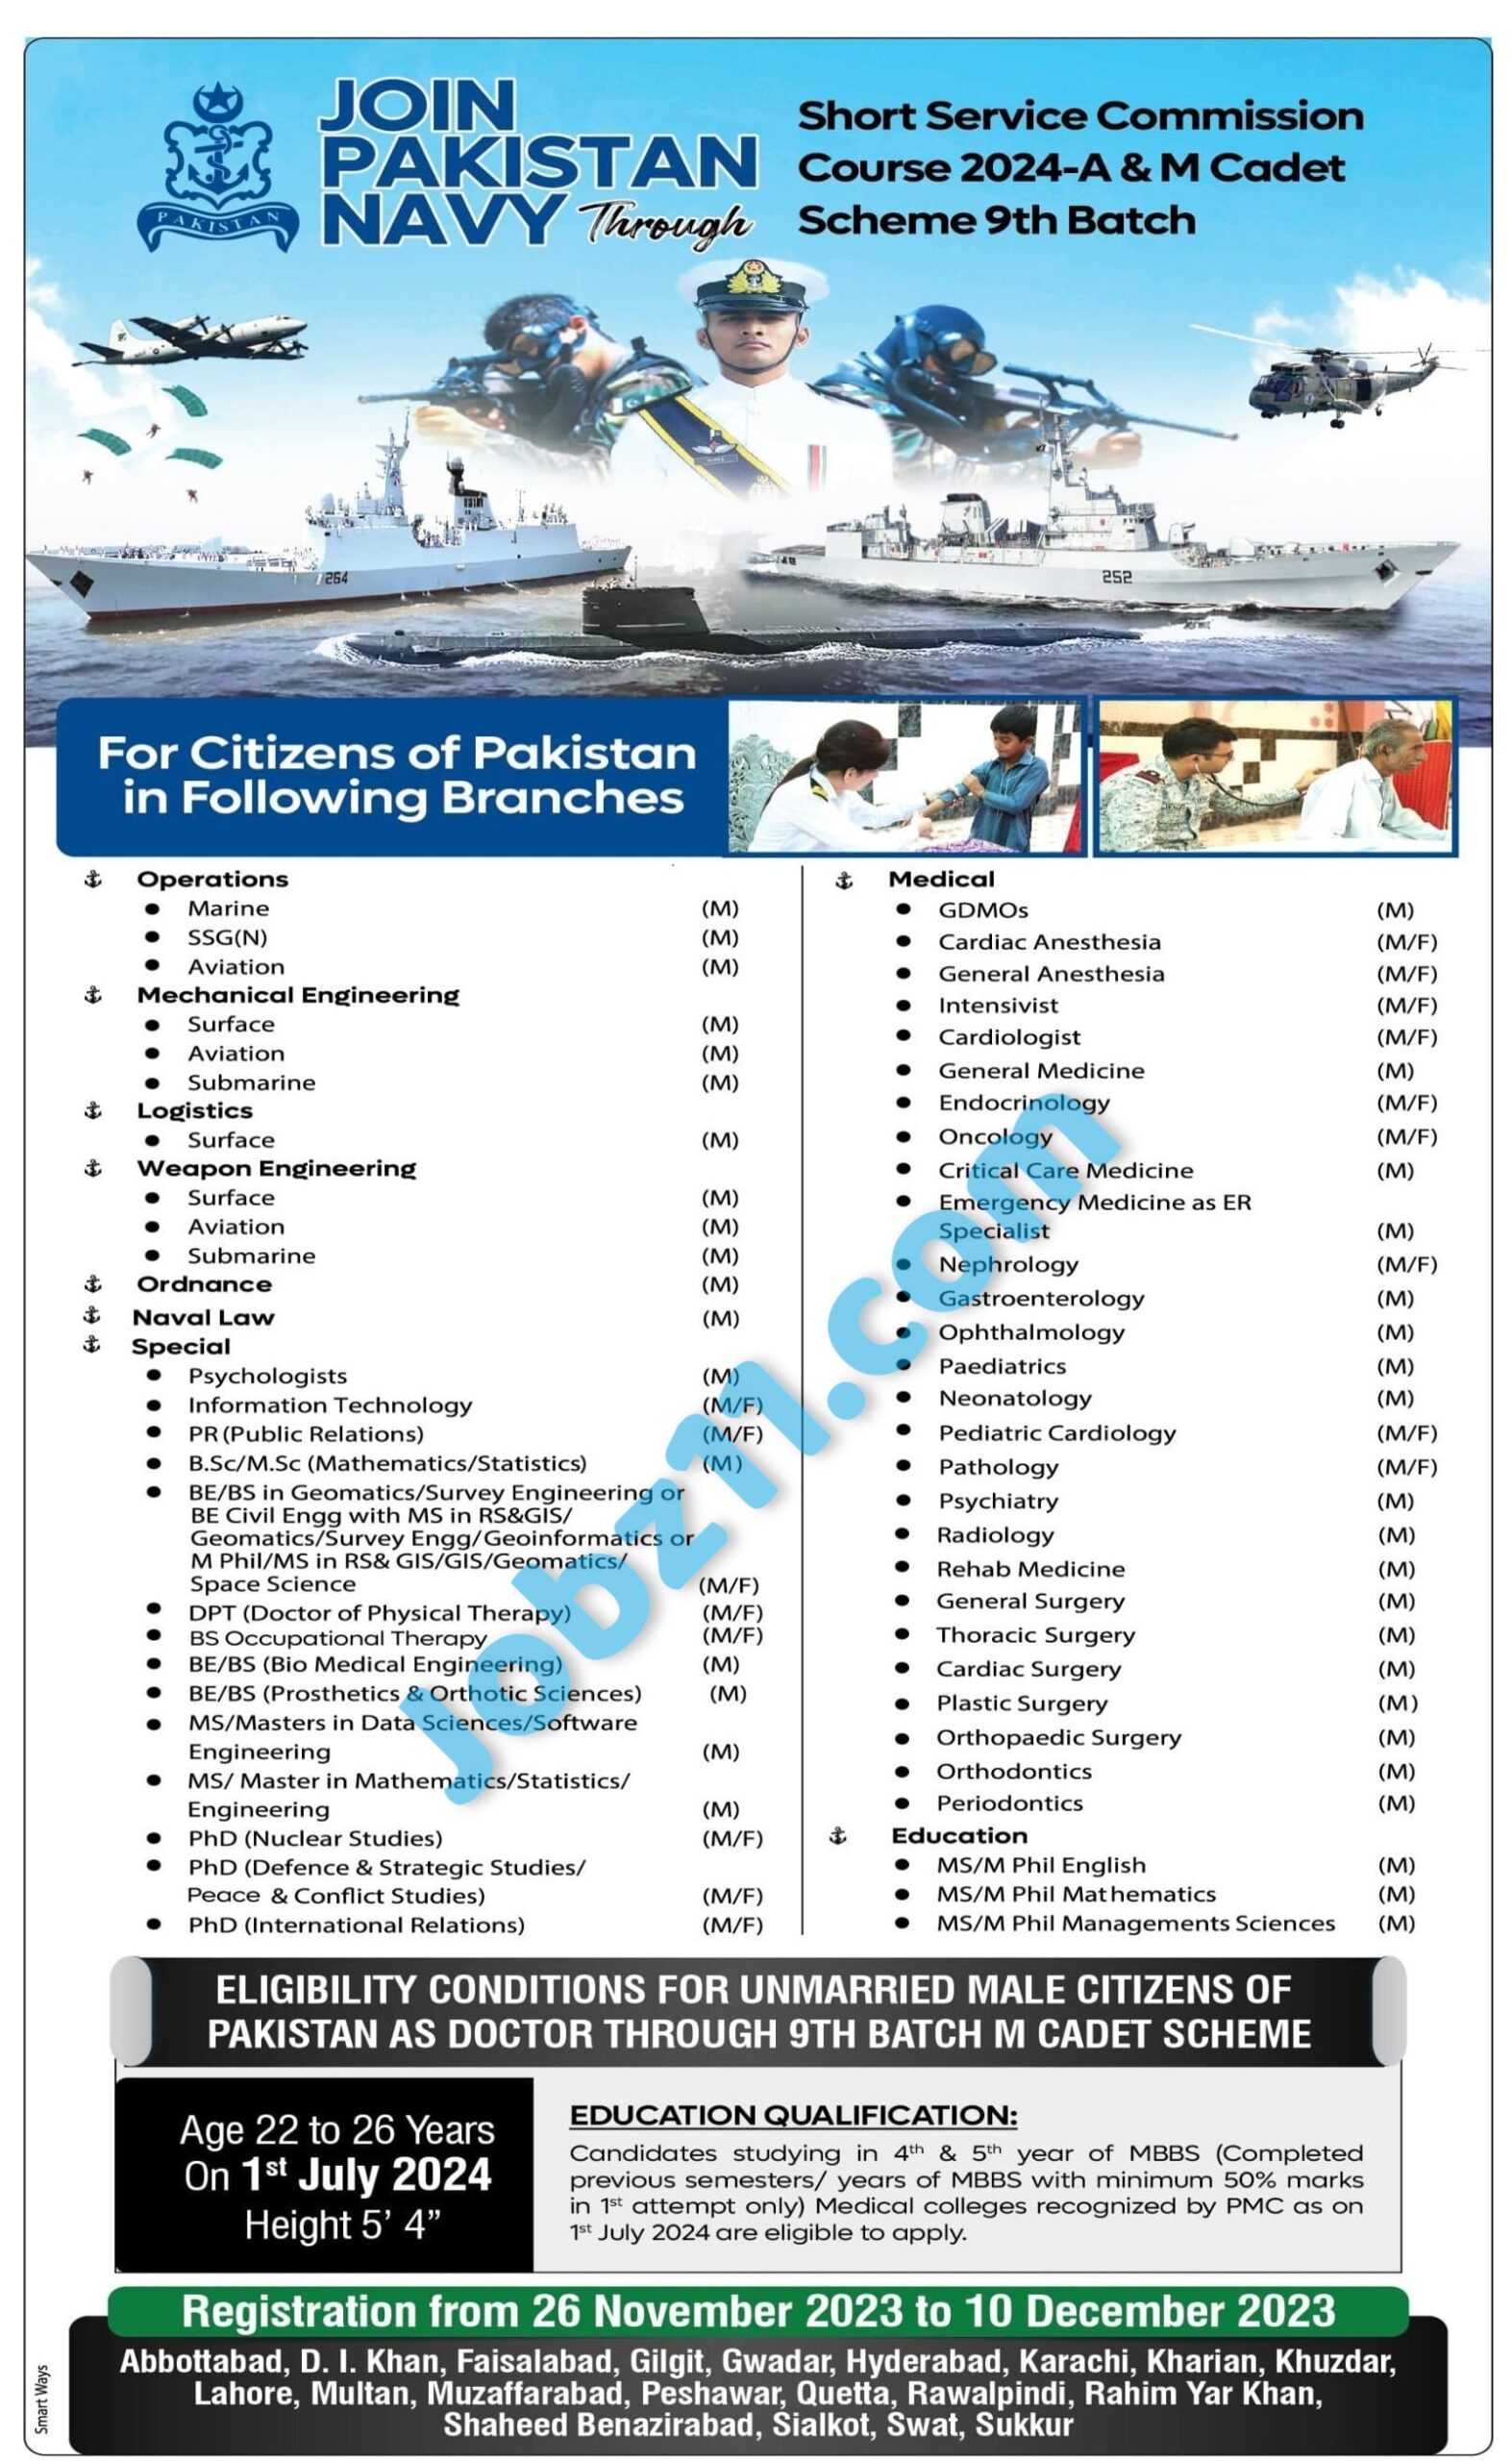 Join Pak Navy Through Short Service Commission Course 2024-A Advertisement